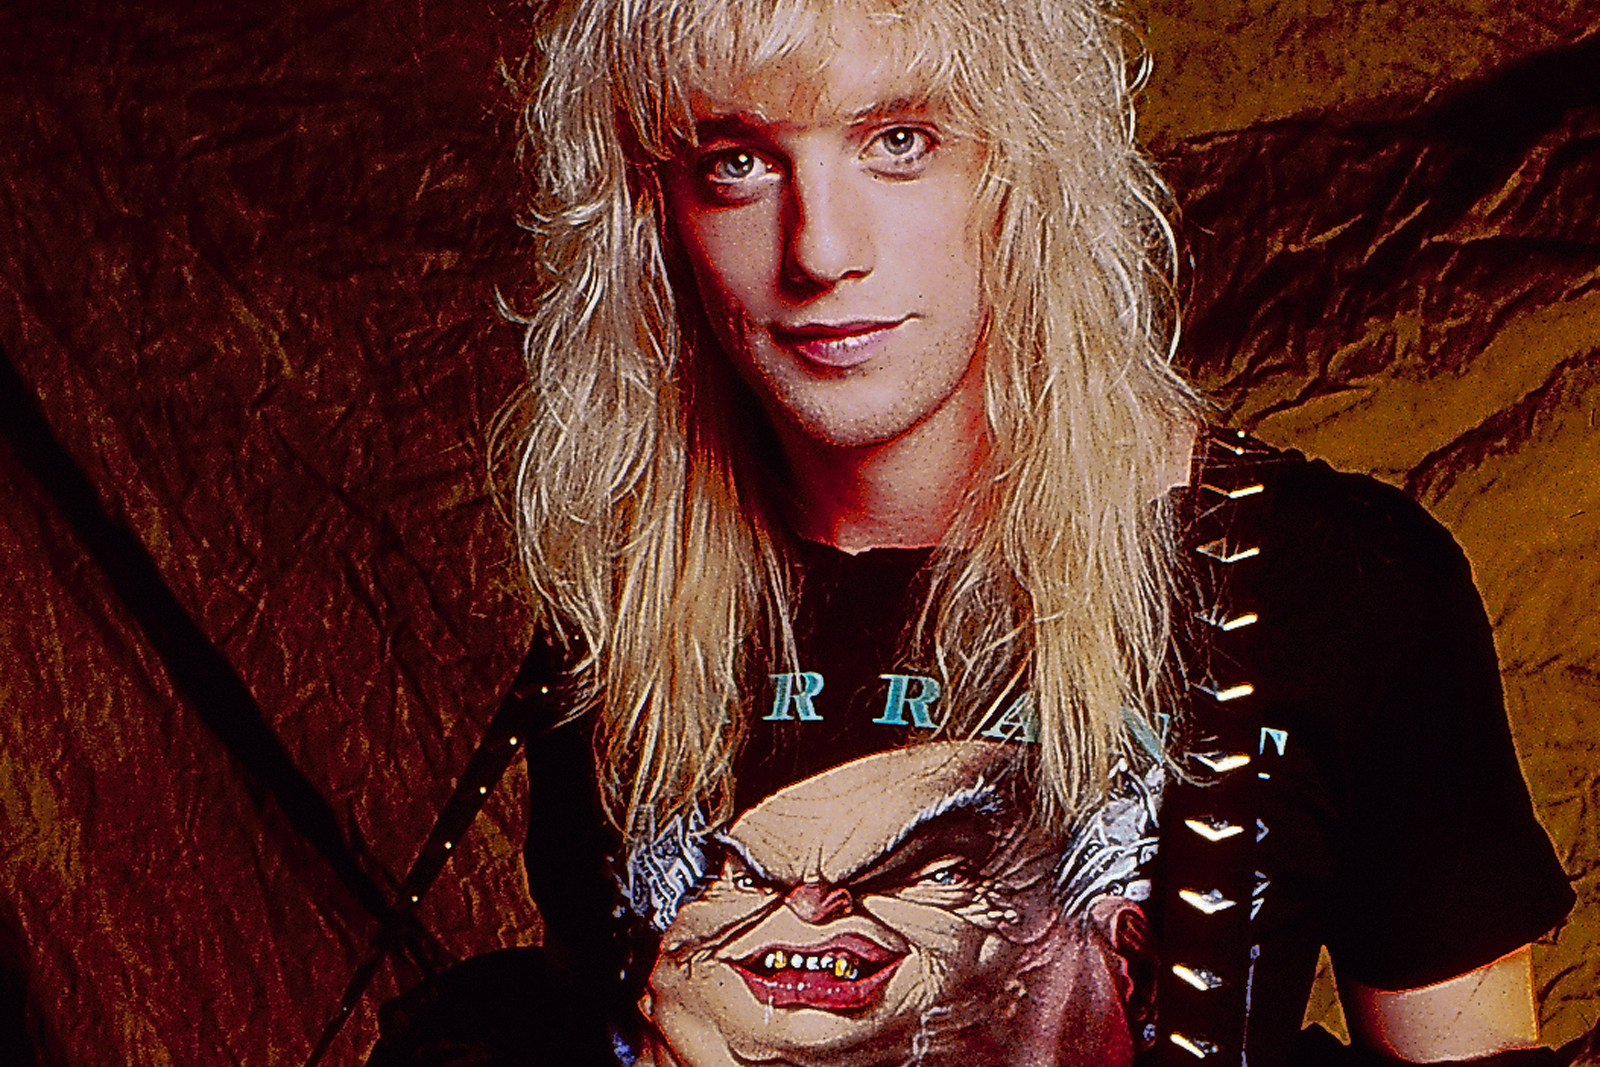 When Warrant S Jani Lane Left Behind A Complicated Legacy